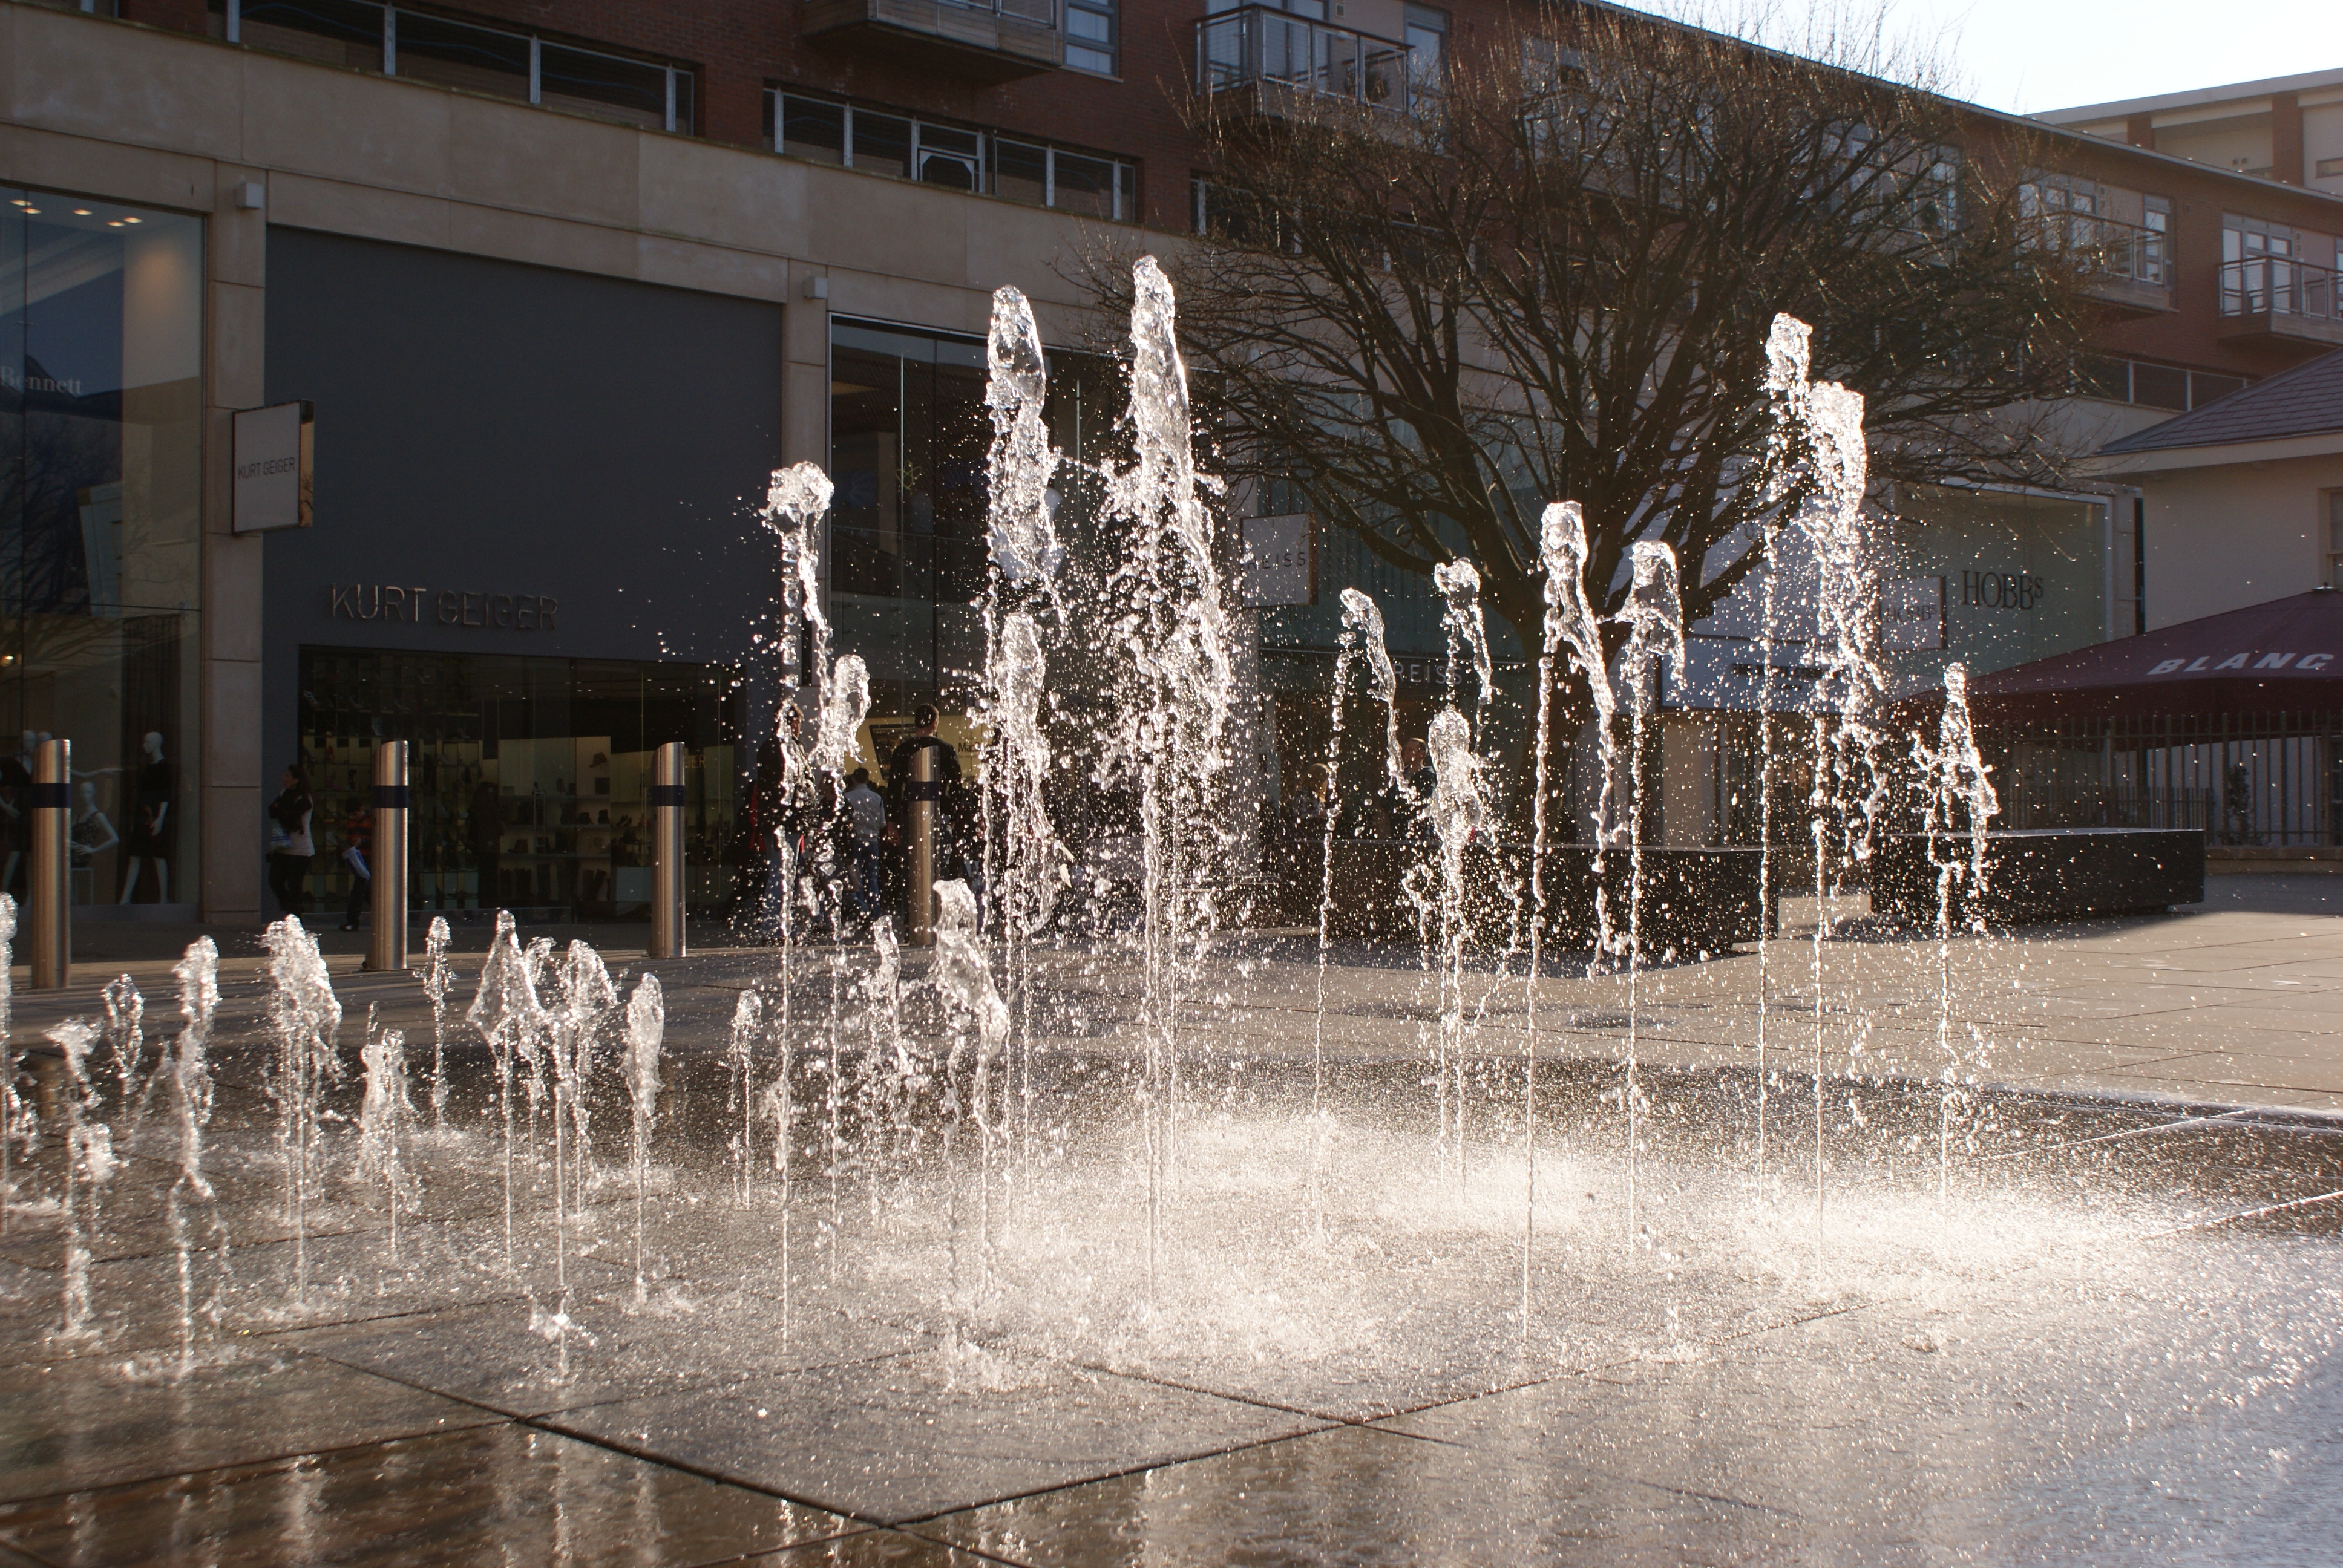 image of the fountains on the edge of Cabot Circus' shopping area